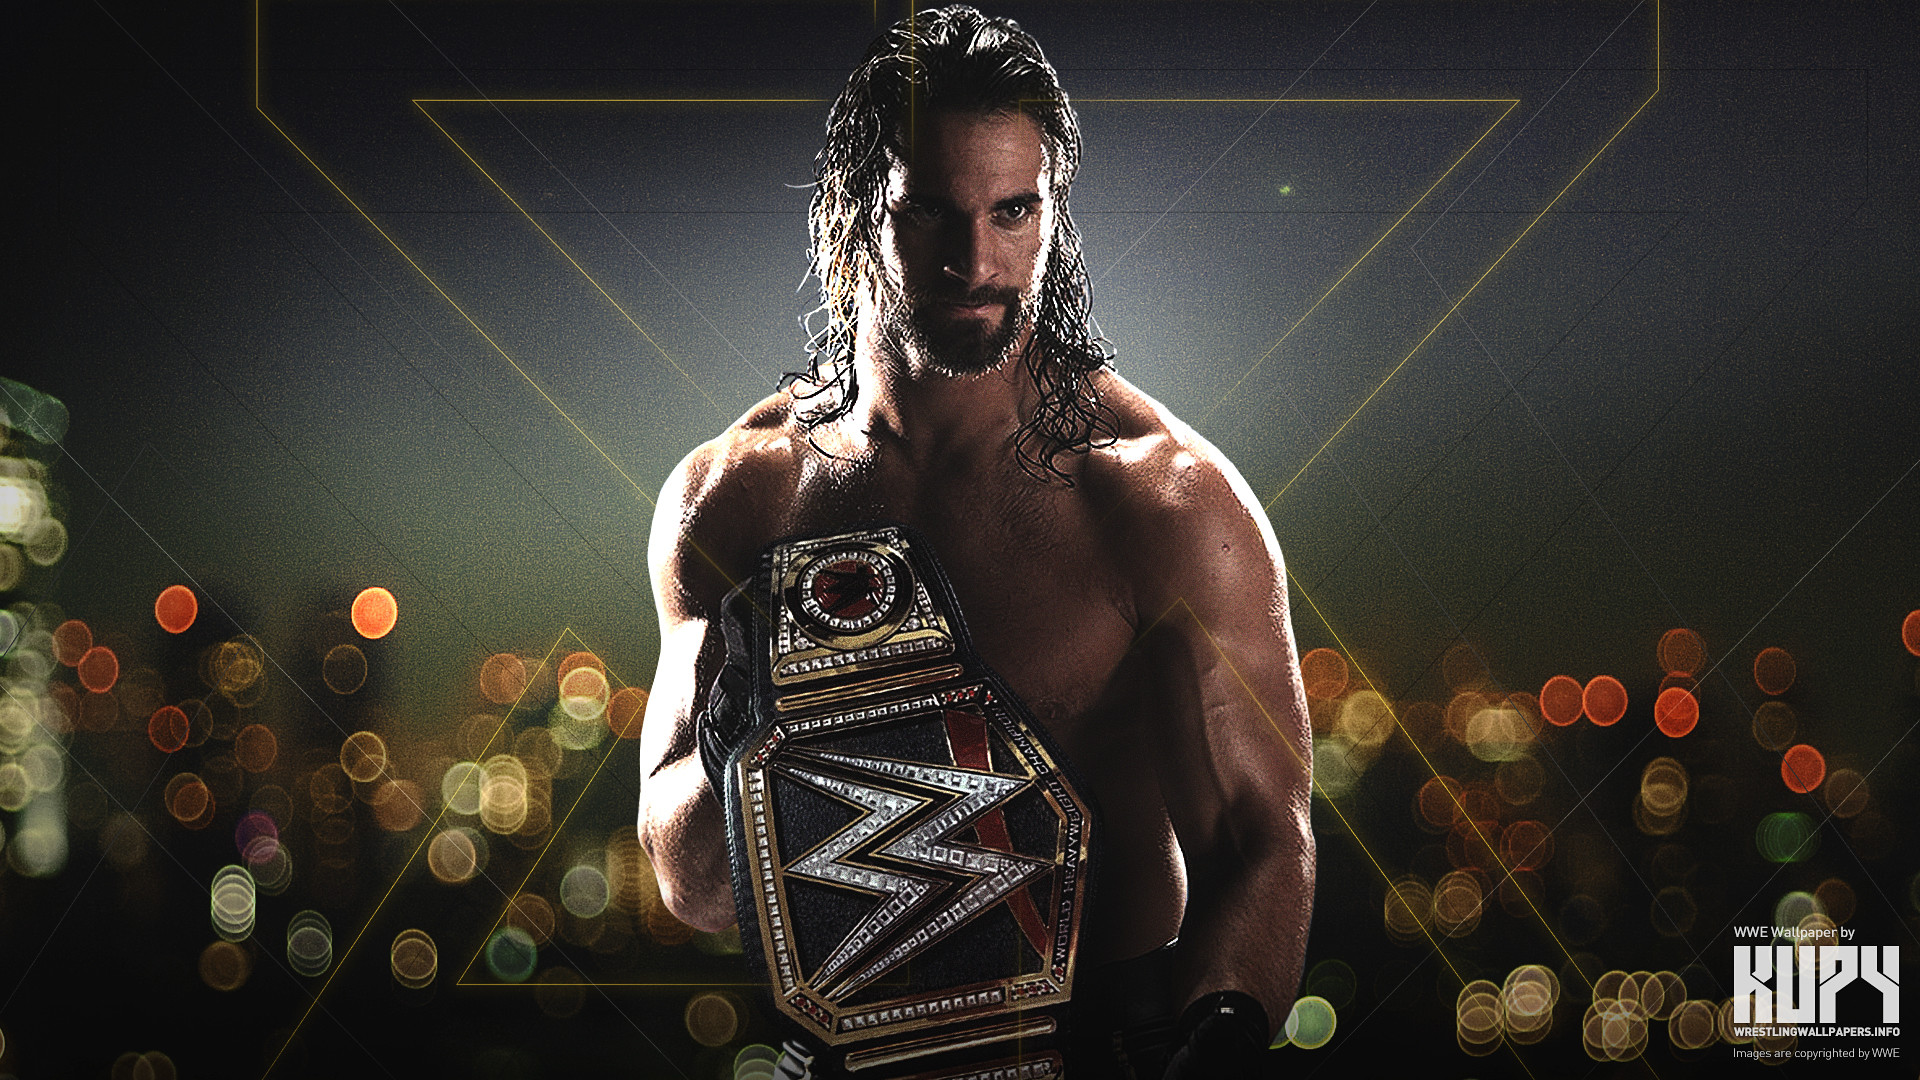 seth rollins wallpaper hd,professional wrestling,wrestler,muscle,games,contact sport